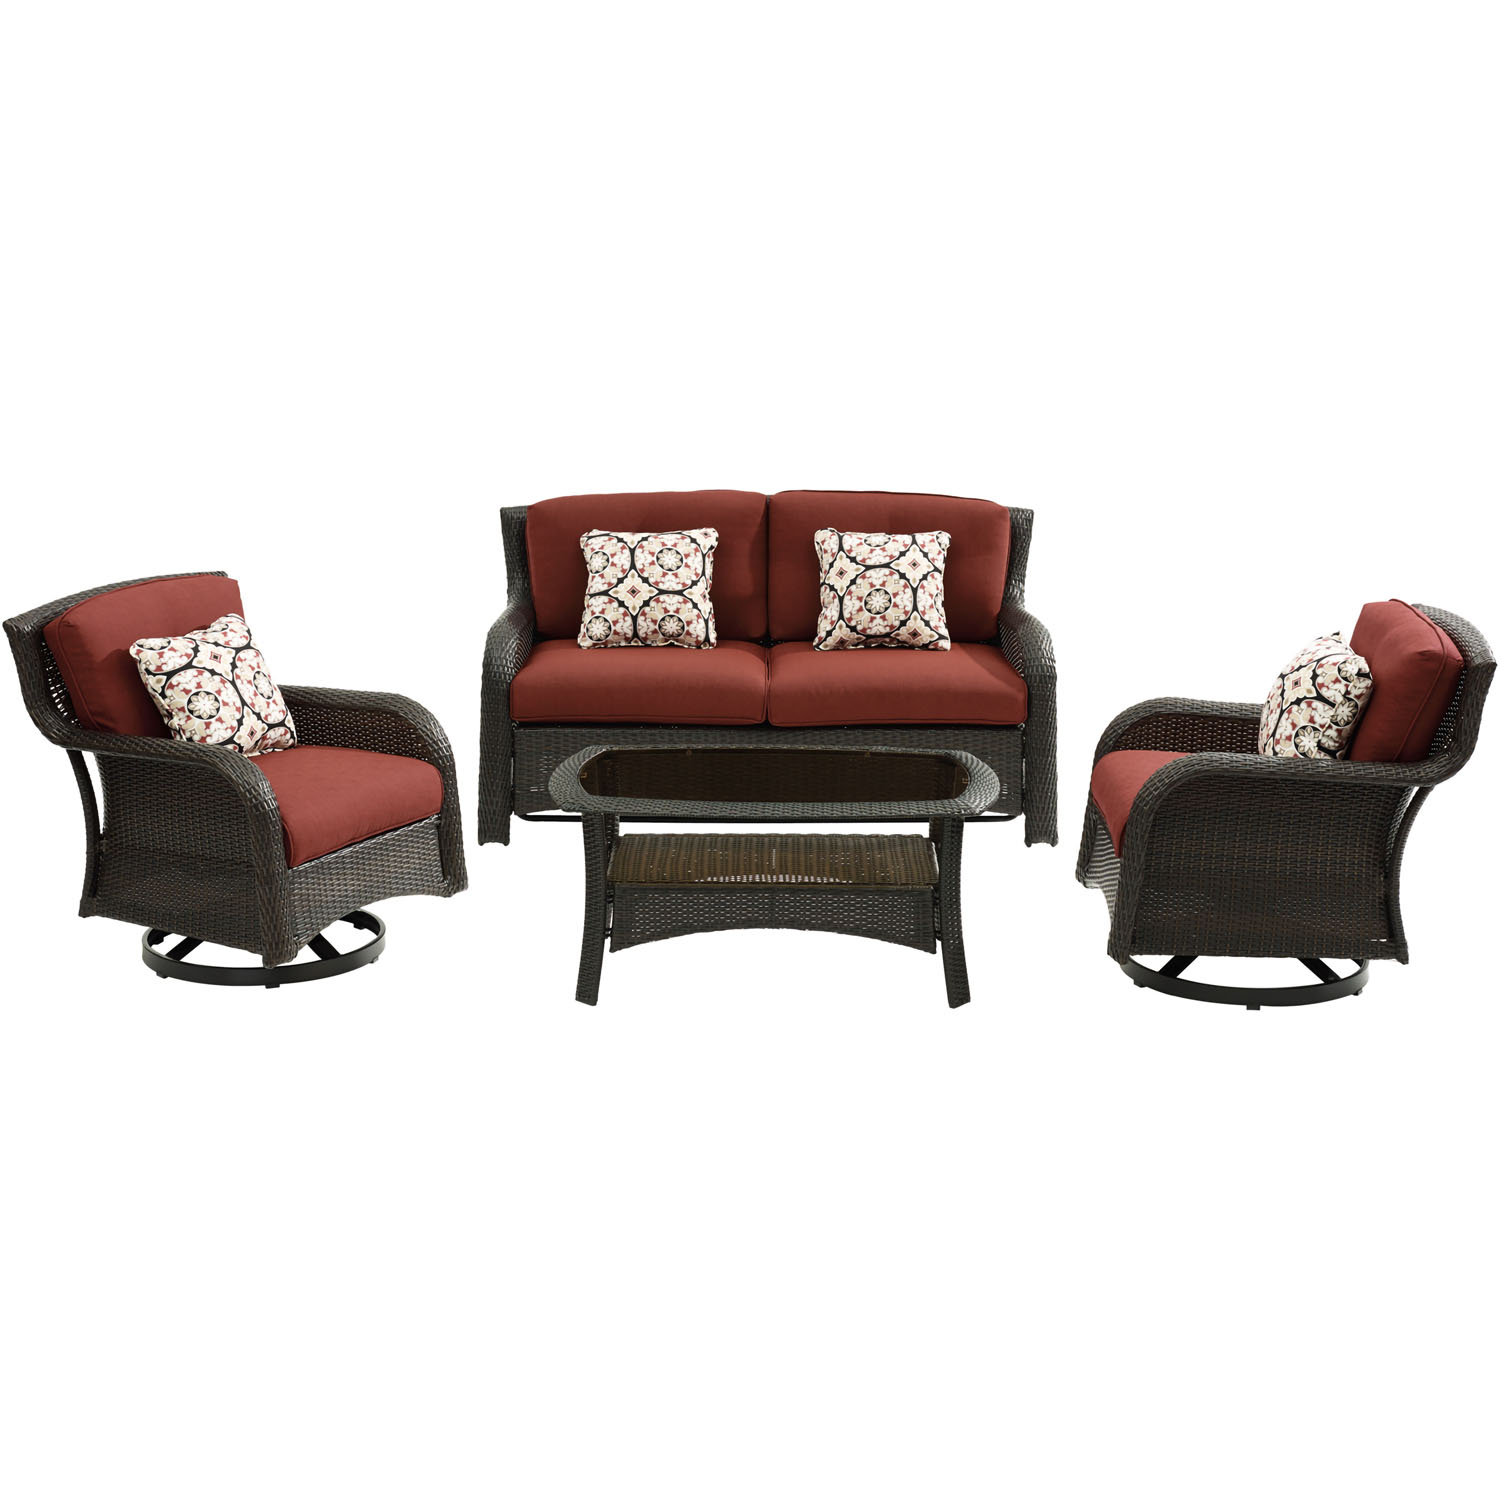 Hanover Strathmere 4-Piece Wicker and Steel Outdoor Conversation Set, Crimson Red - image 1 of 12